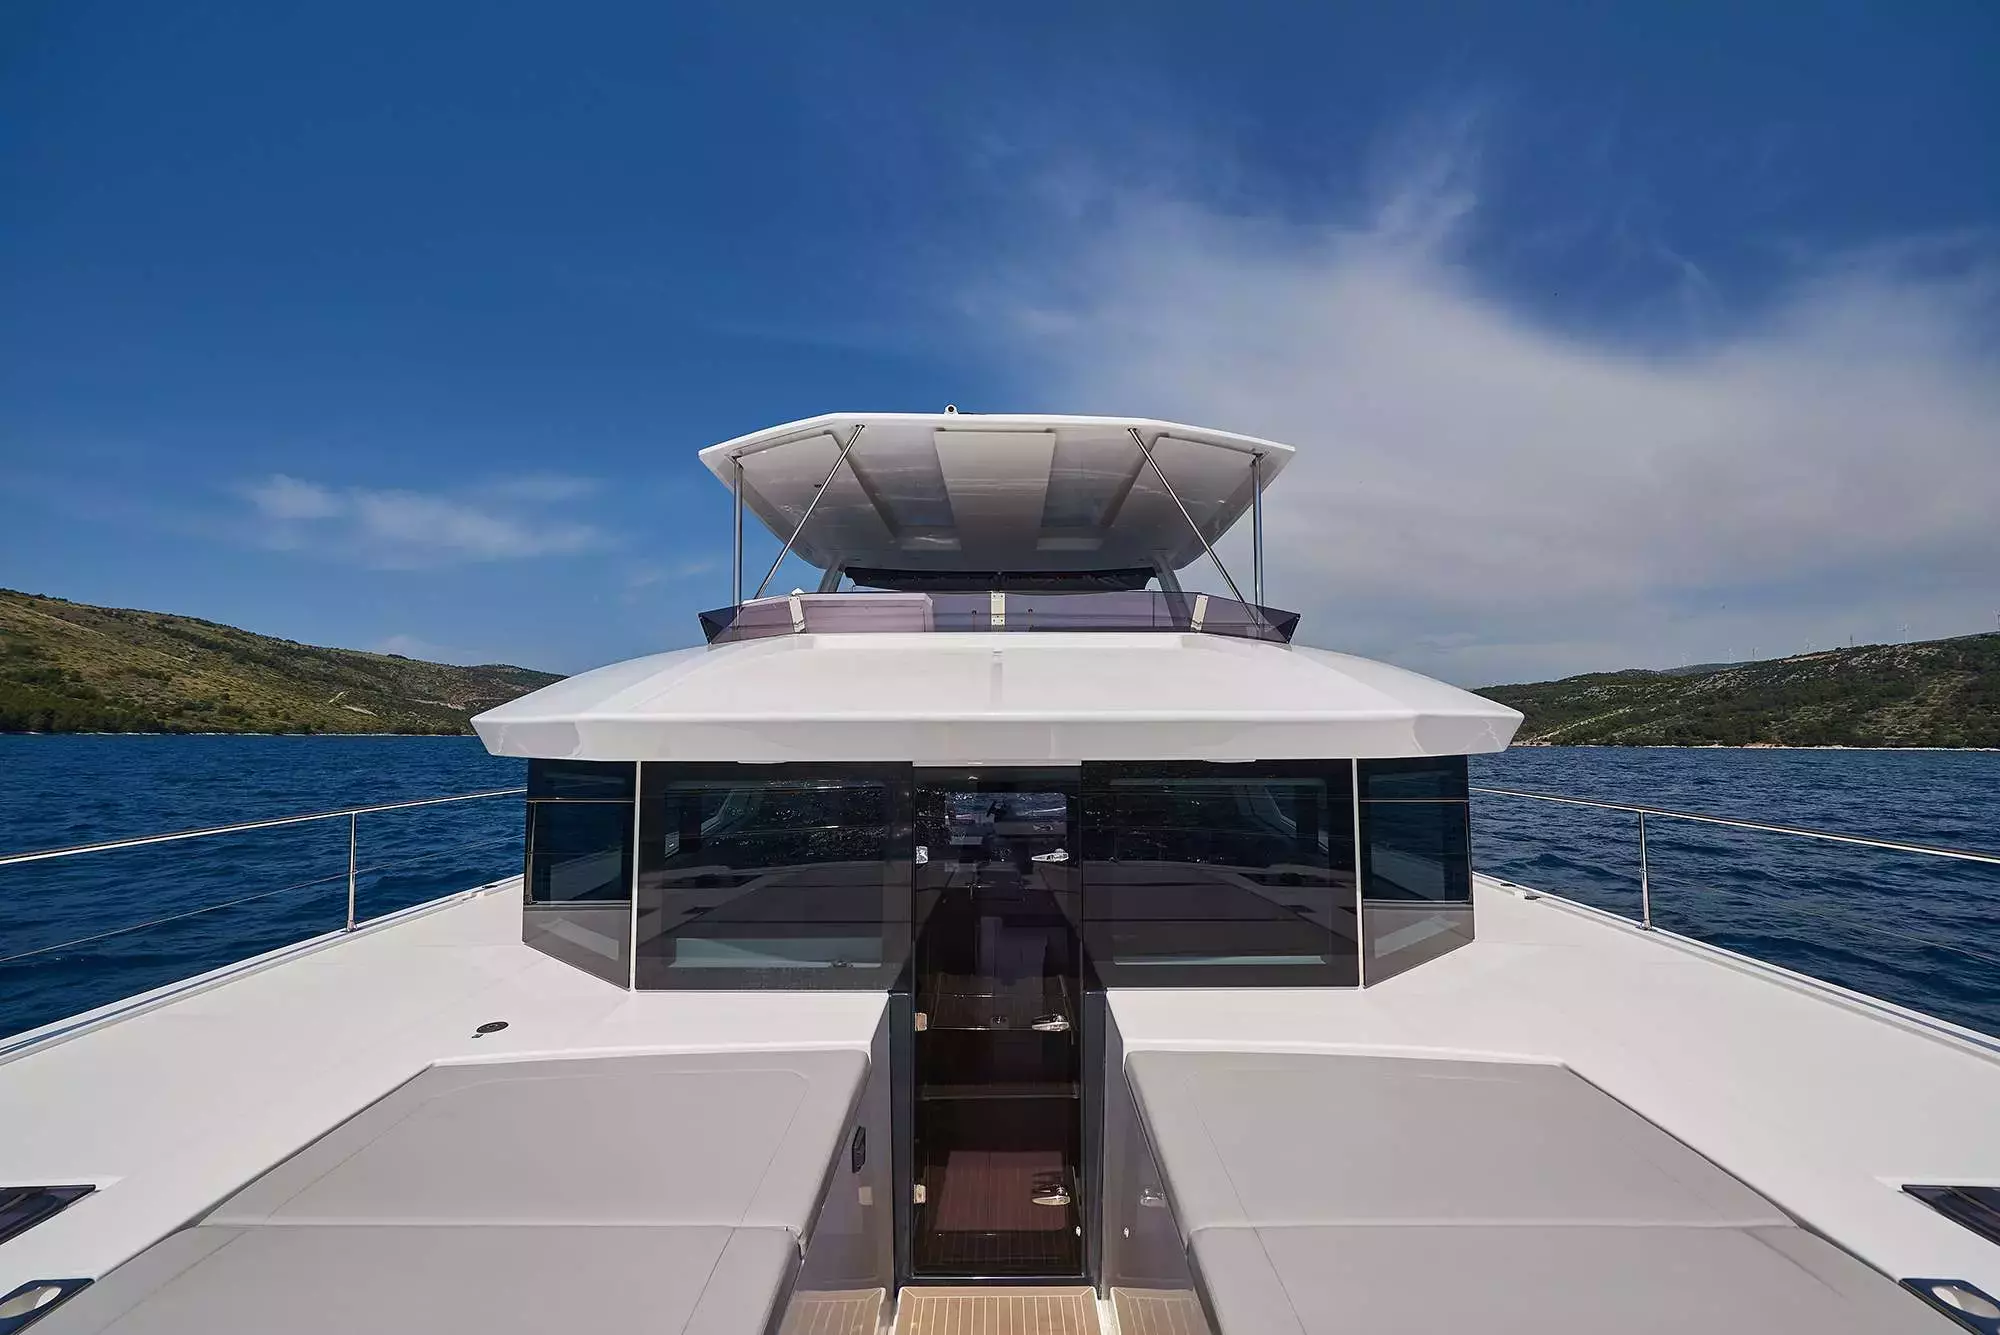 Good Vibes by Leopard Catamarans - Top rates for a Charter of a private Power Catamaran in Croatia